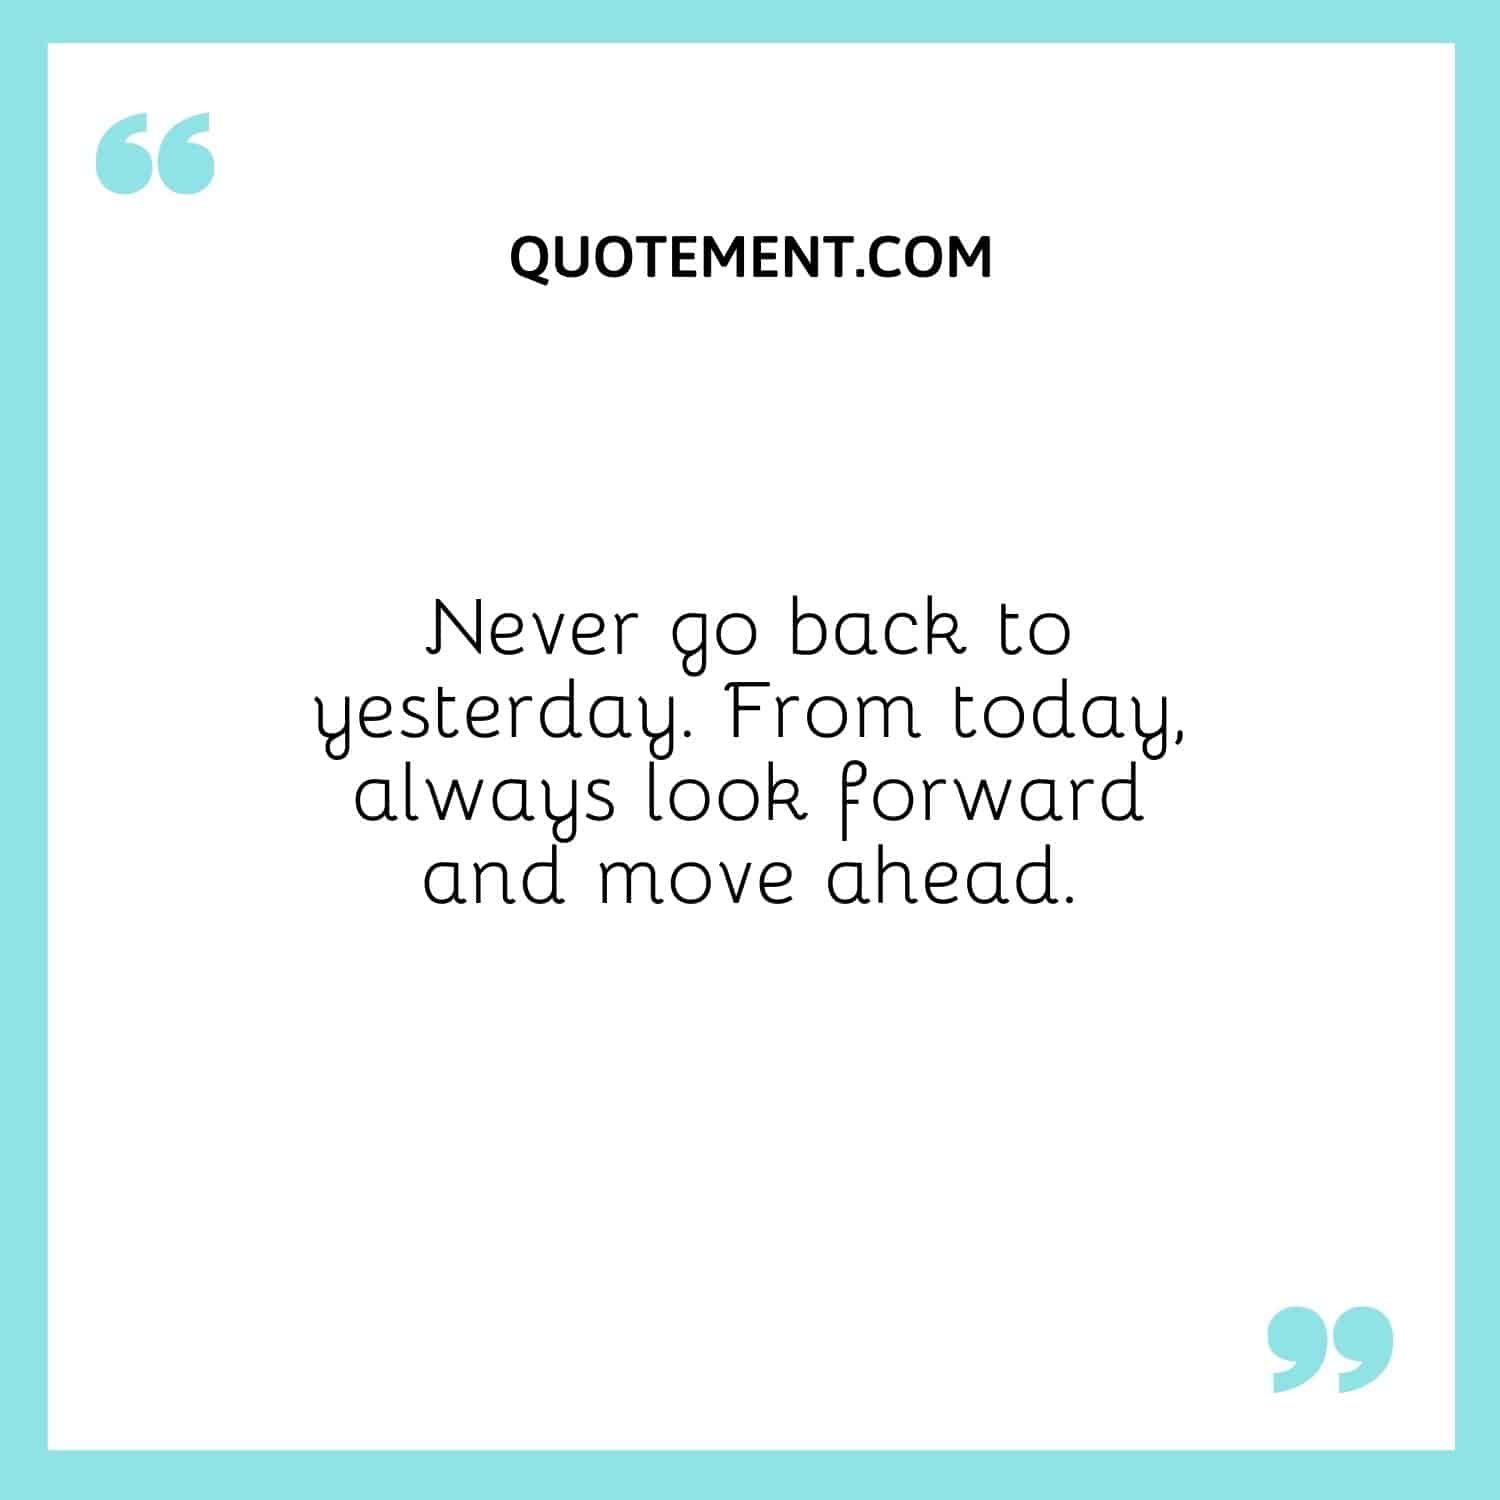 Never go back to yesterday. From today, always look forward and move ahead.